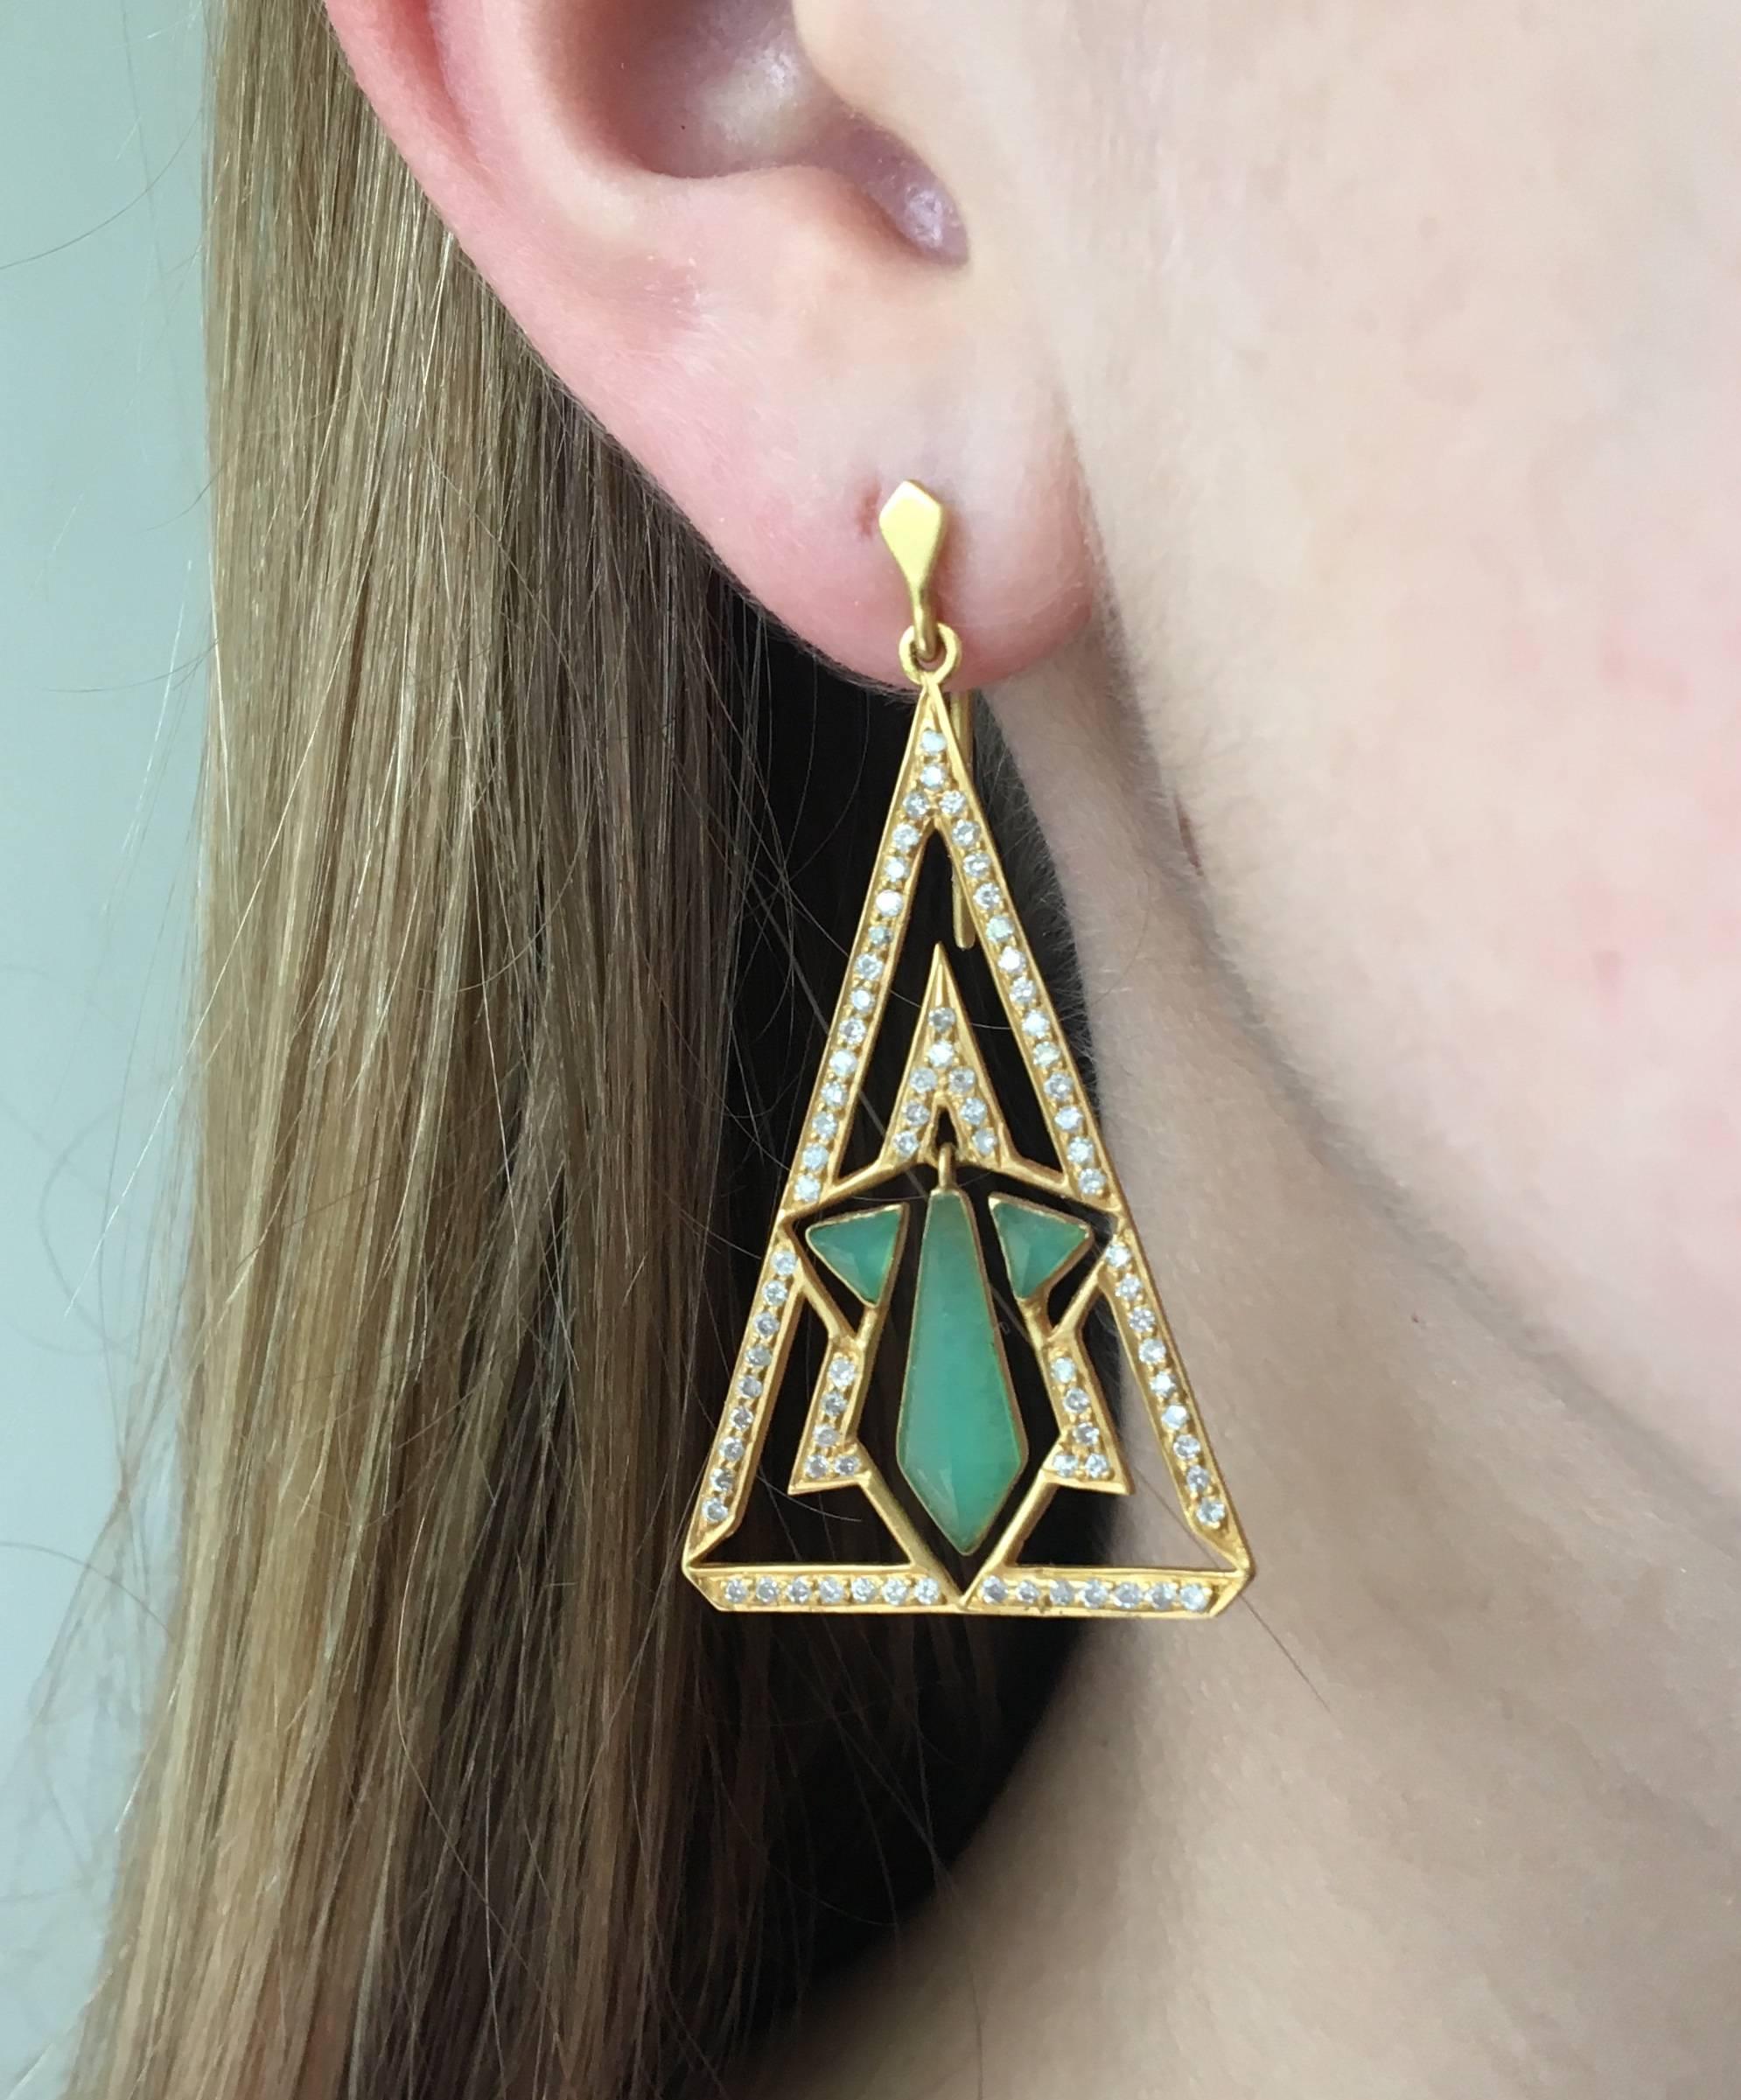 Green Chrysophrase geometric cut stones are at the center of these architecturally inspired 18kt Gold and Diamond Earrings.  Finished in Lauren Harper's signature 18kt Gold matte finish, these earrings are perfect for both day and night. Extremely